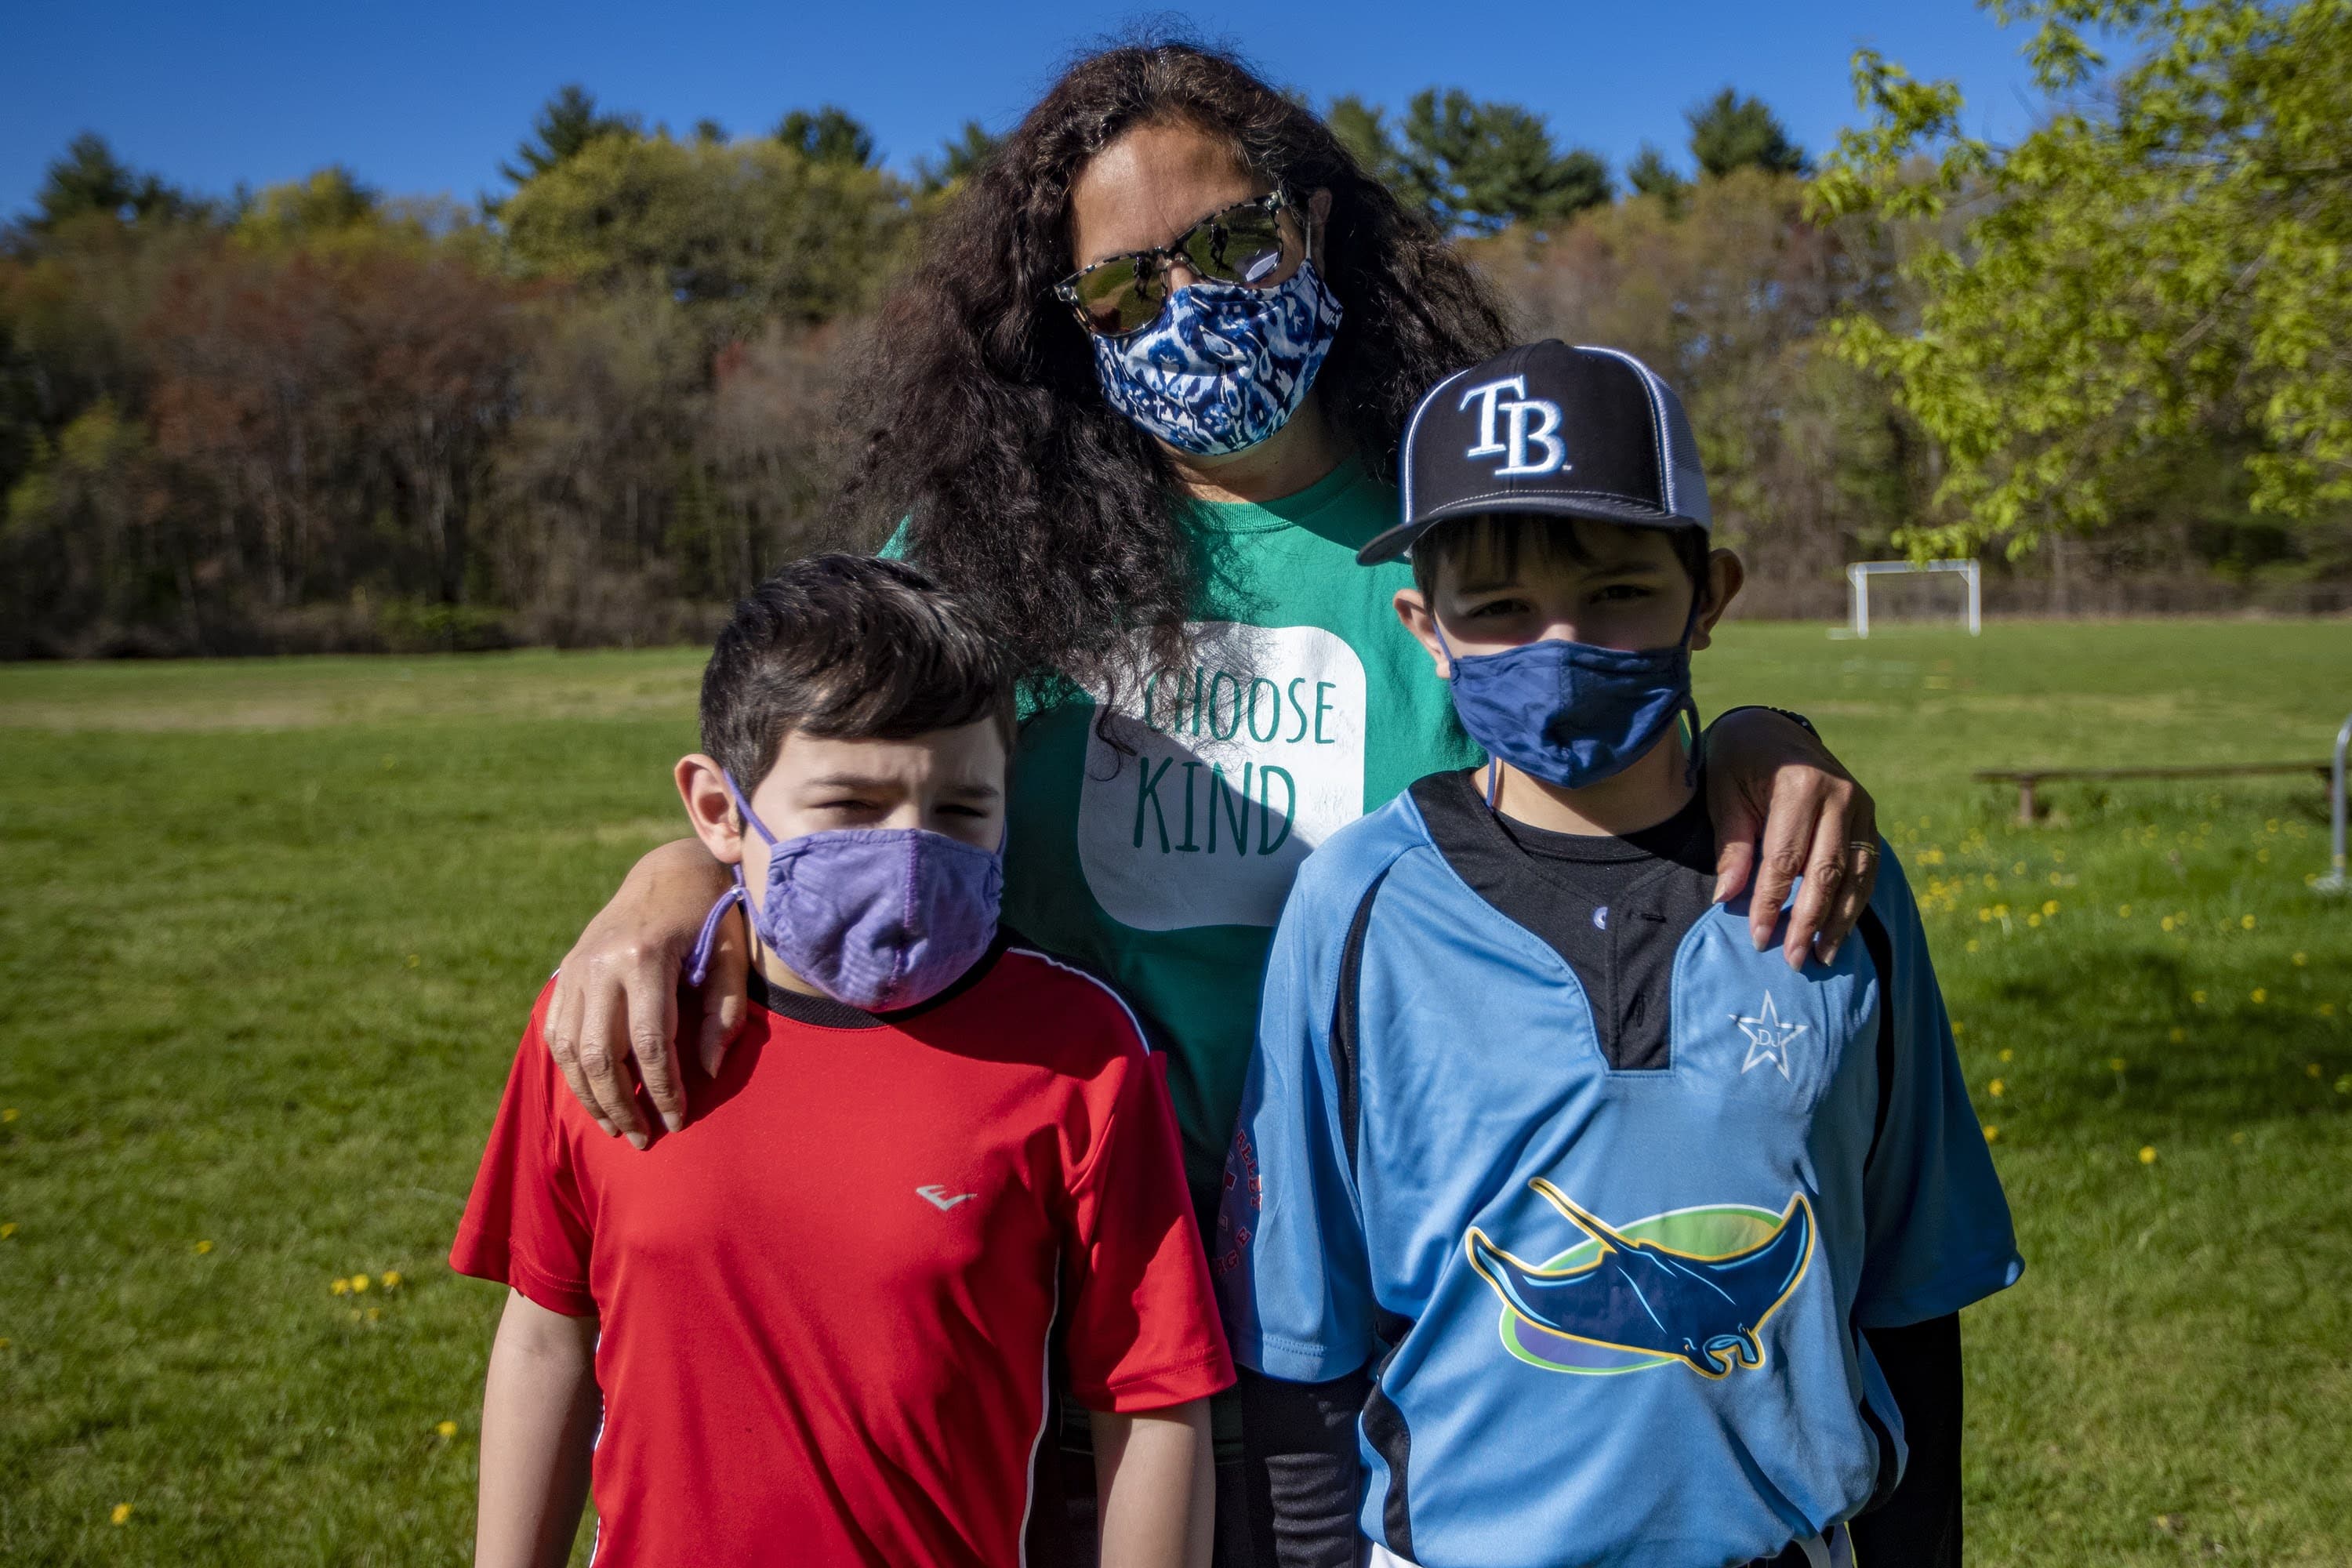 Alex Waldron, center, with her two sons Benjamin, 9, and Thomas, 11, in Maynard. (Jesse Costa/WBUR)